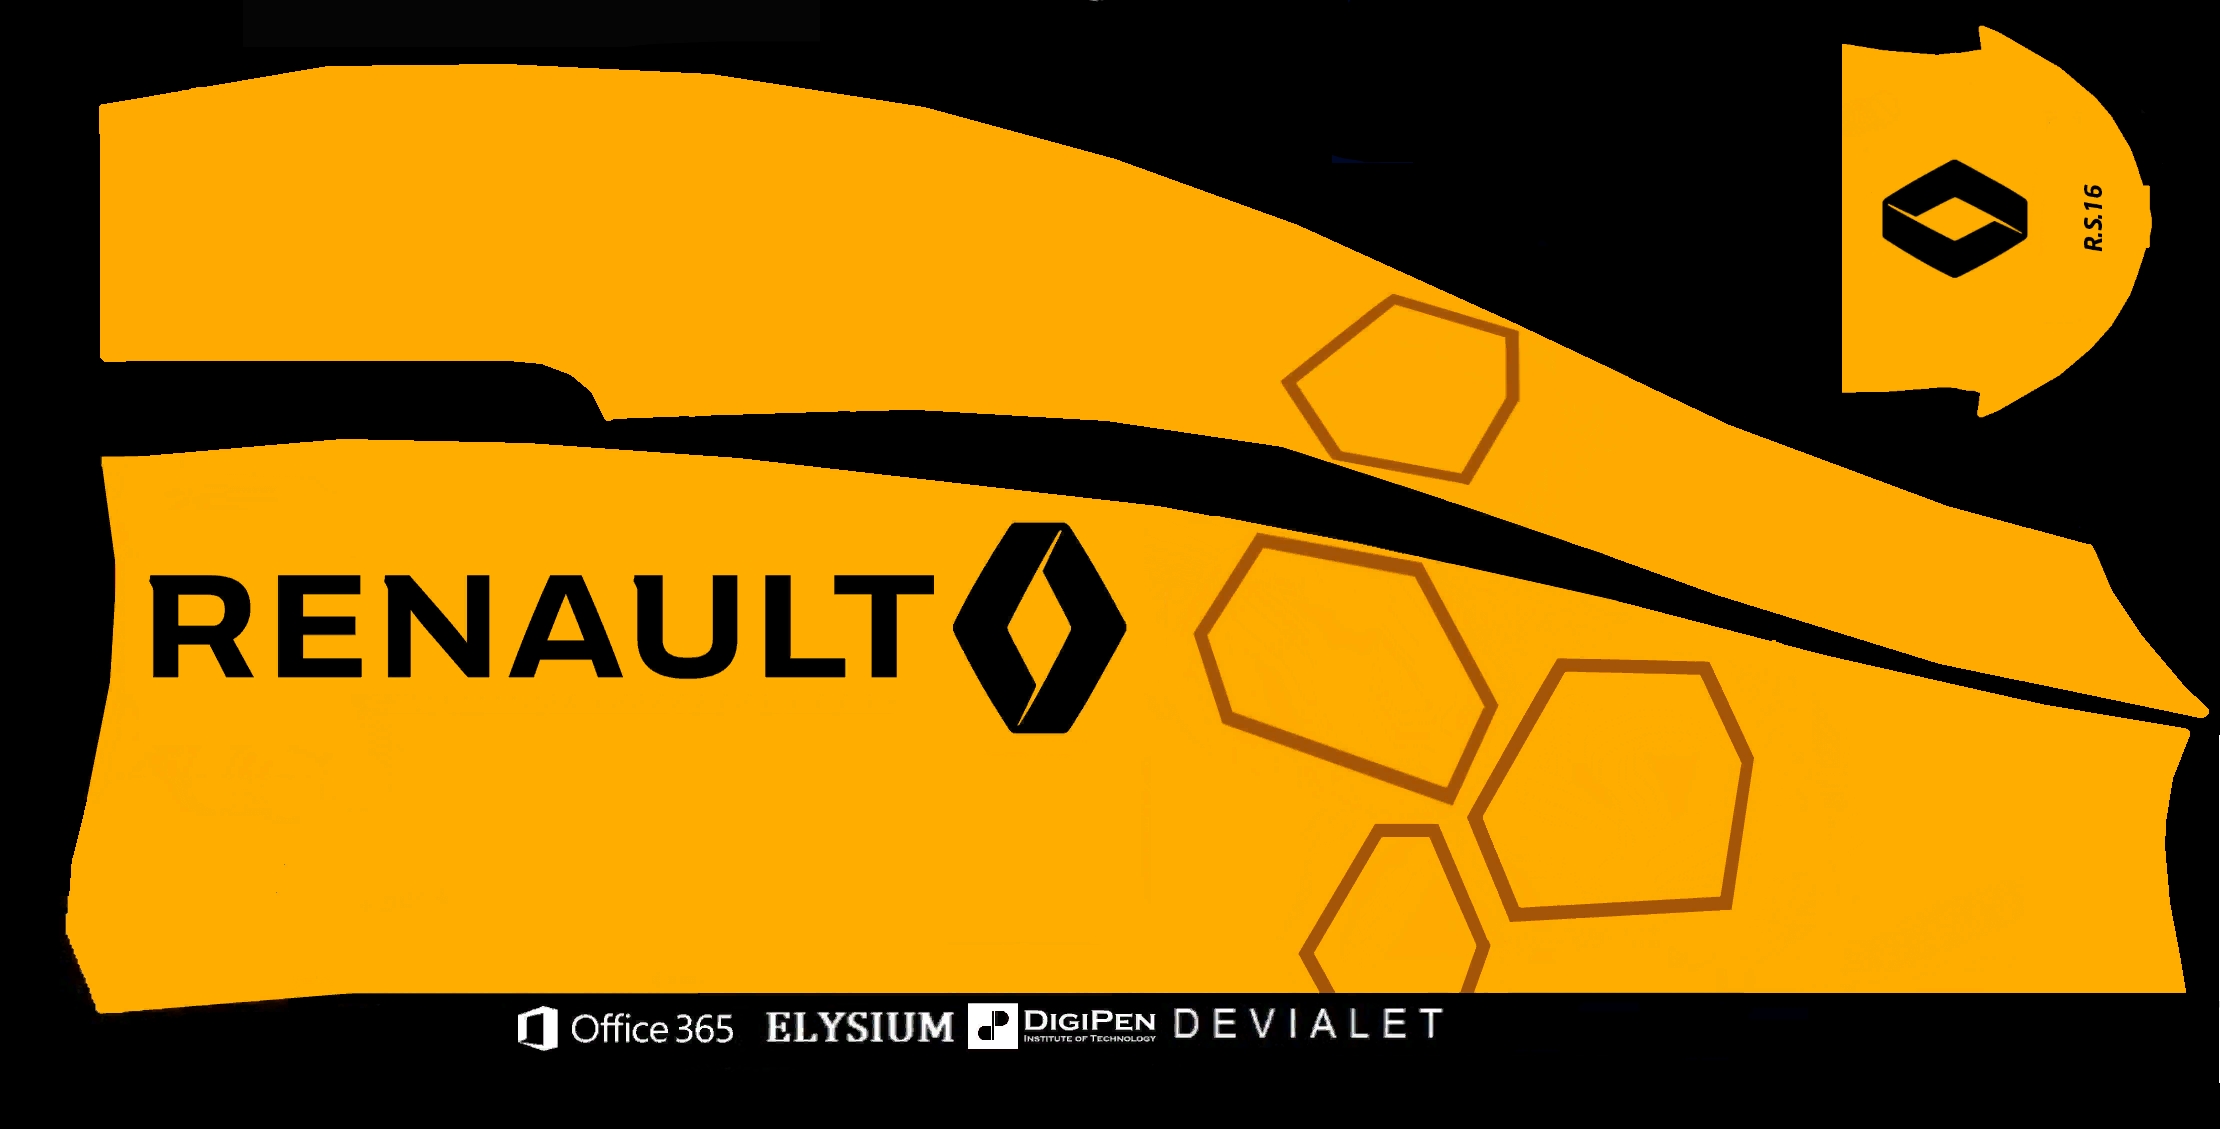 Renault_New_Logo_Font_Decals_Livery.jpg